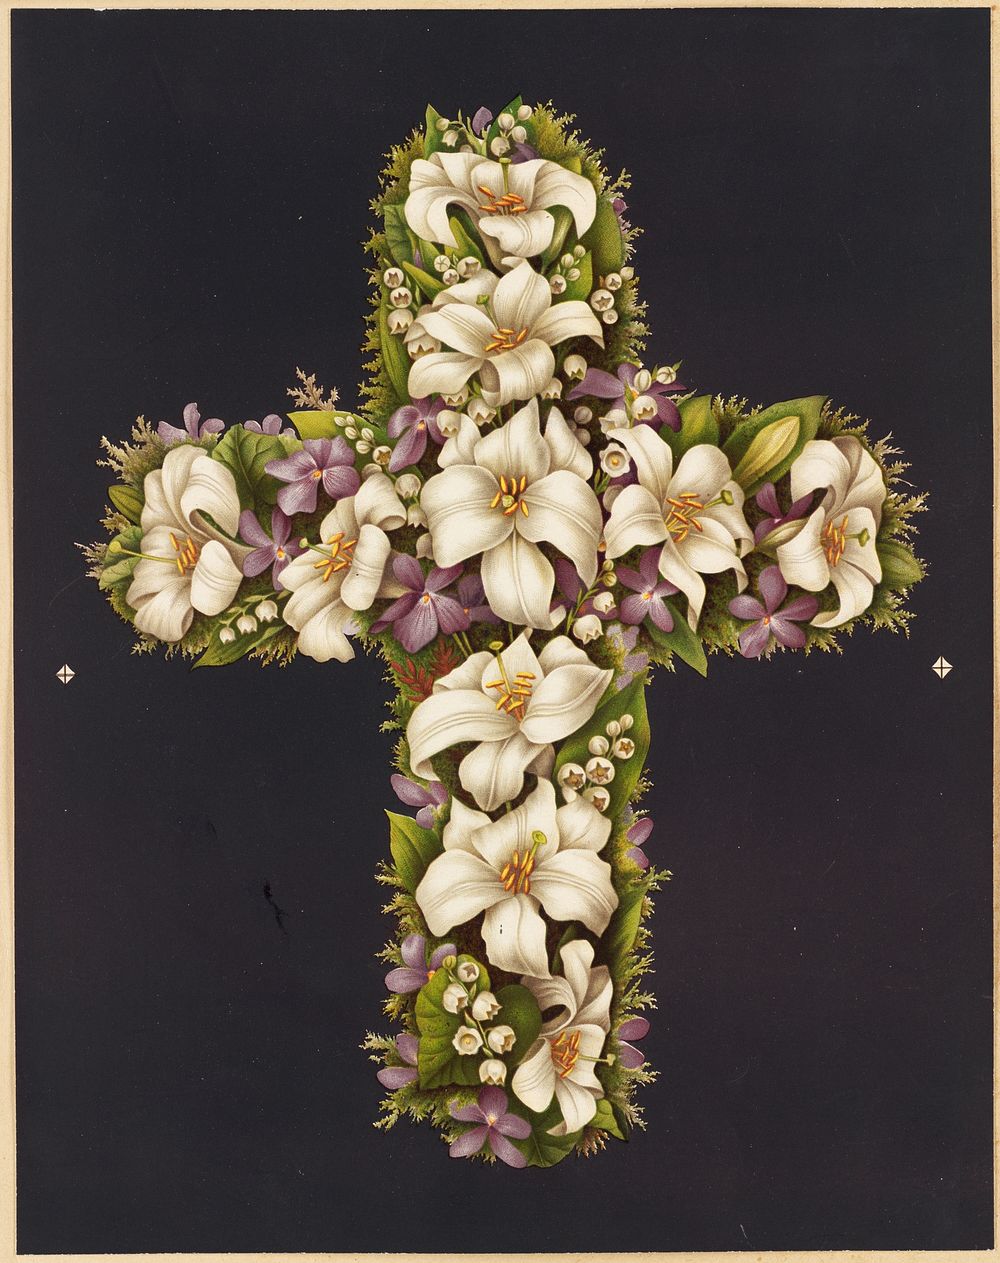             Easter lily cross           by Olive E. Whitney